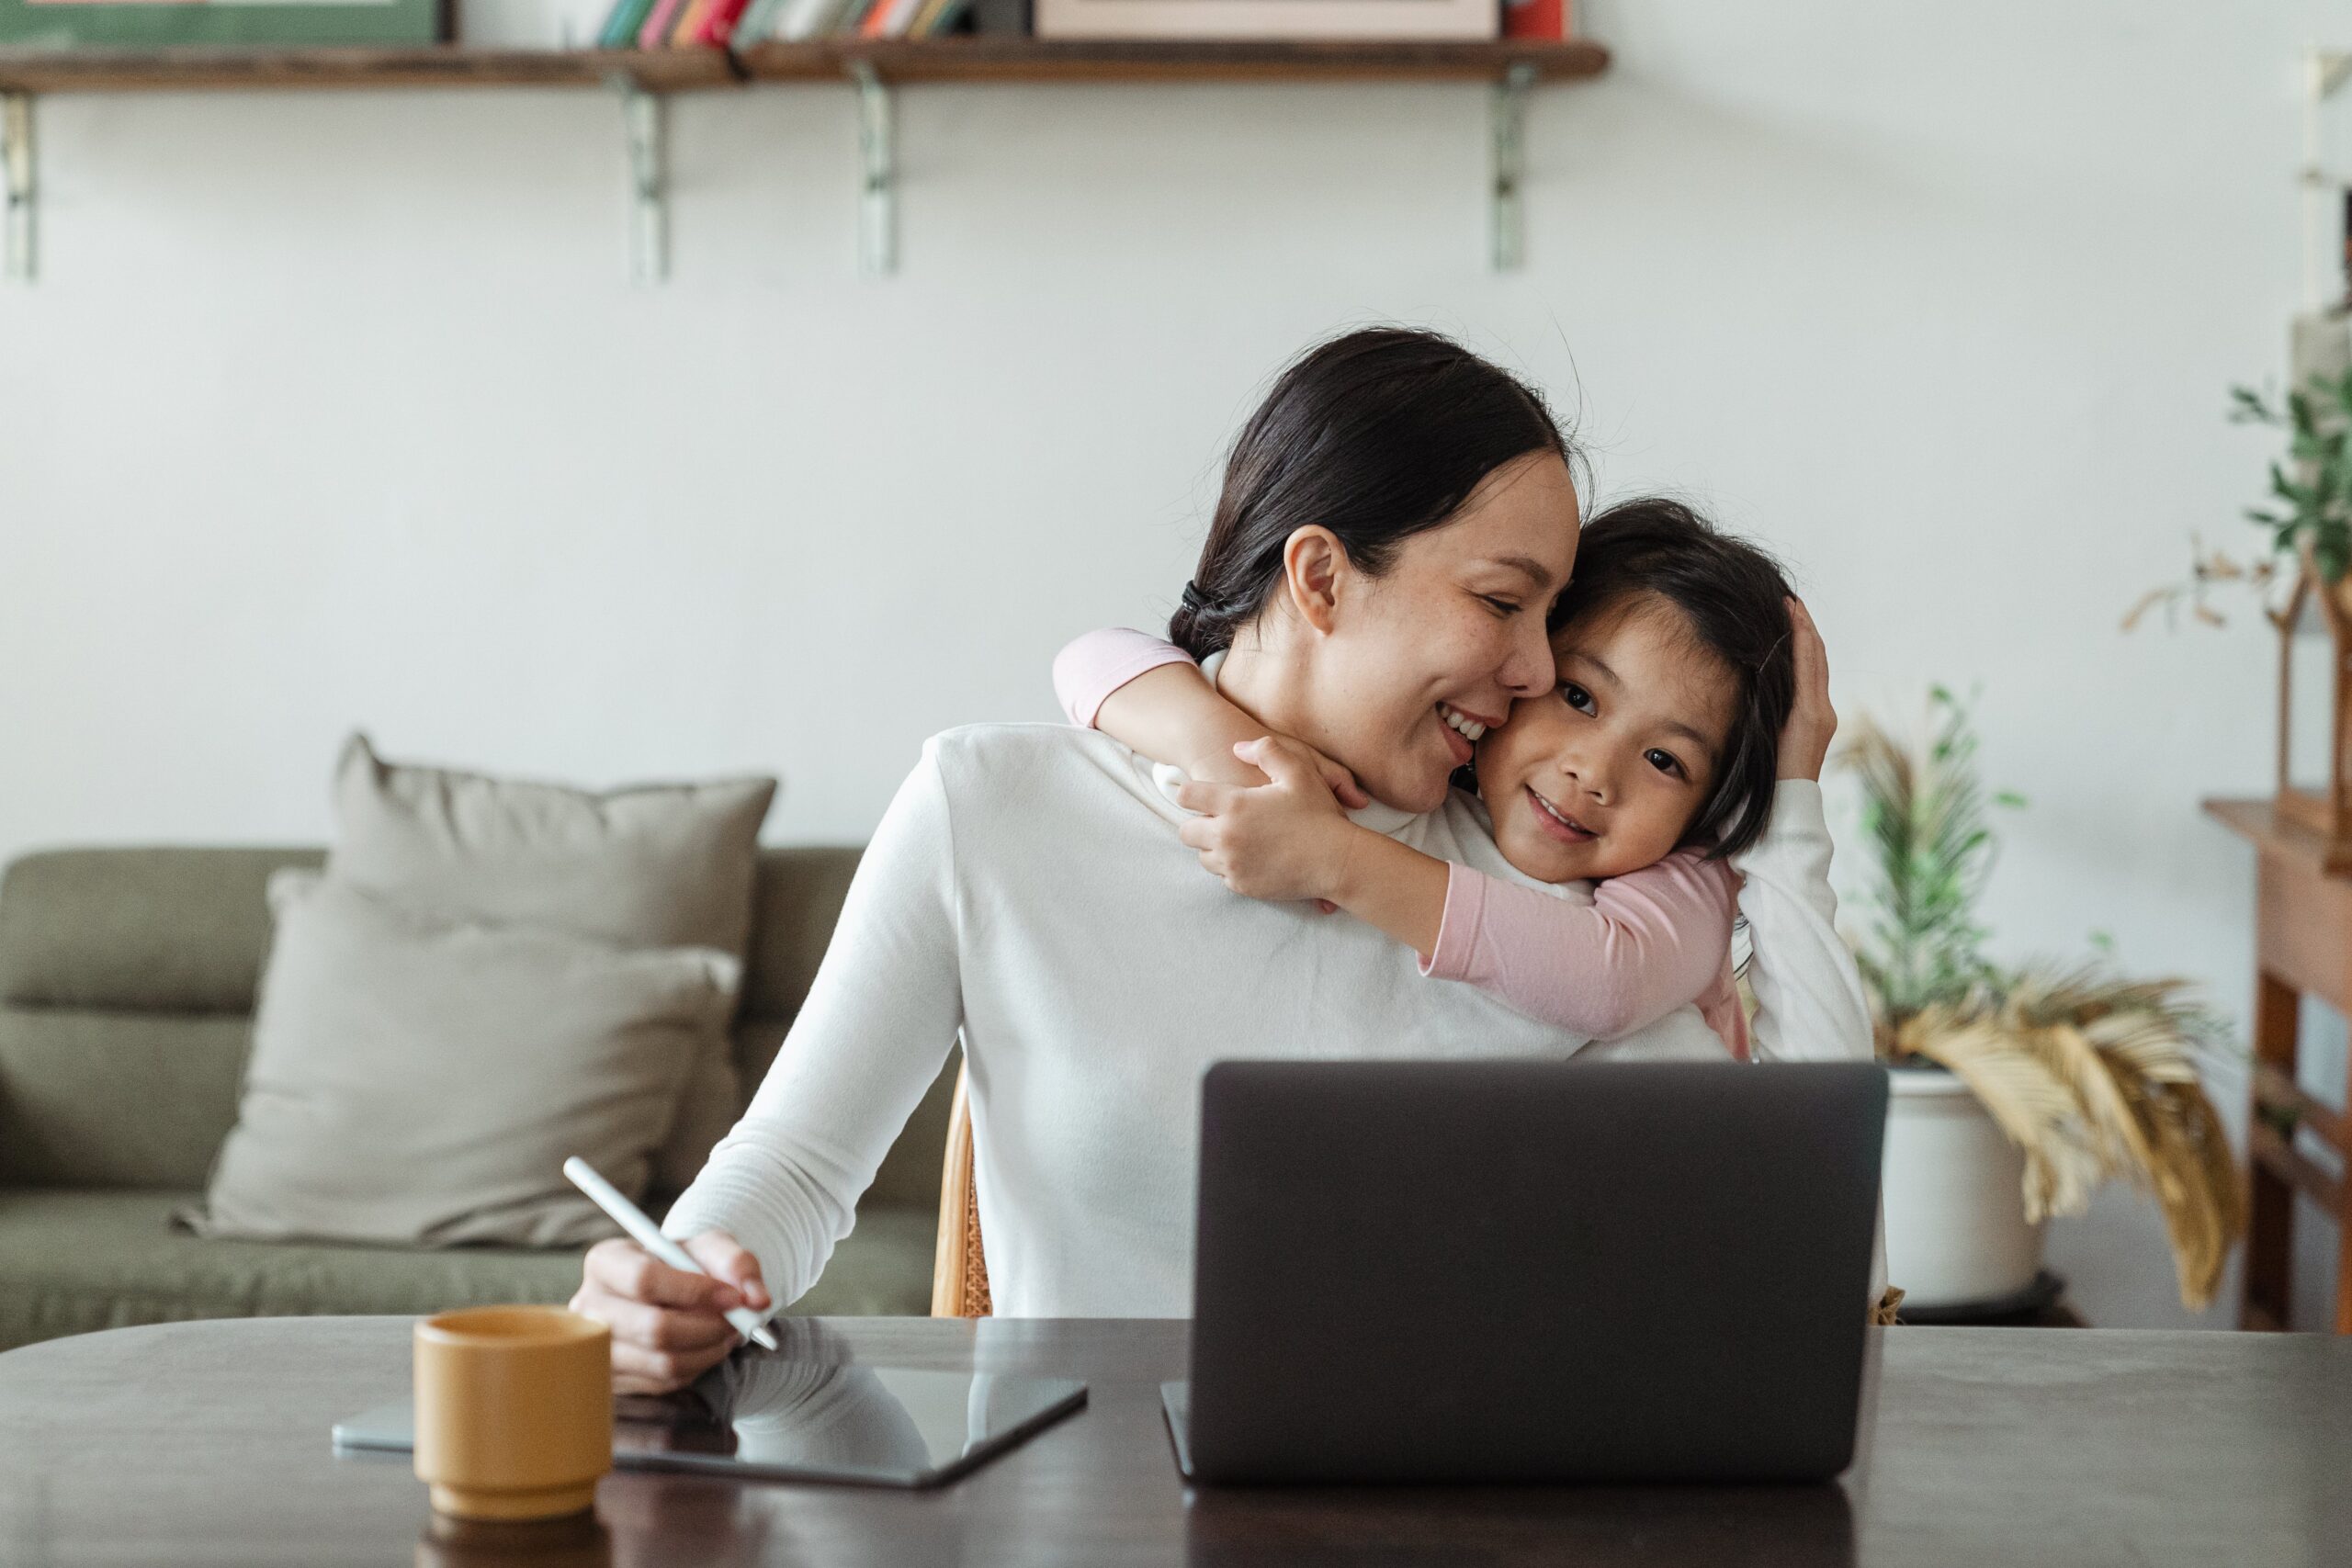 A smiling woman working from home with daughter, demonstrating employee wellbeing 